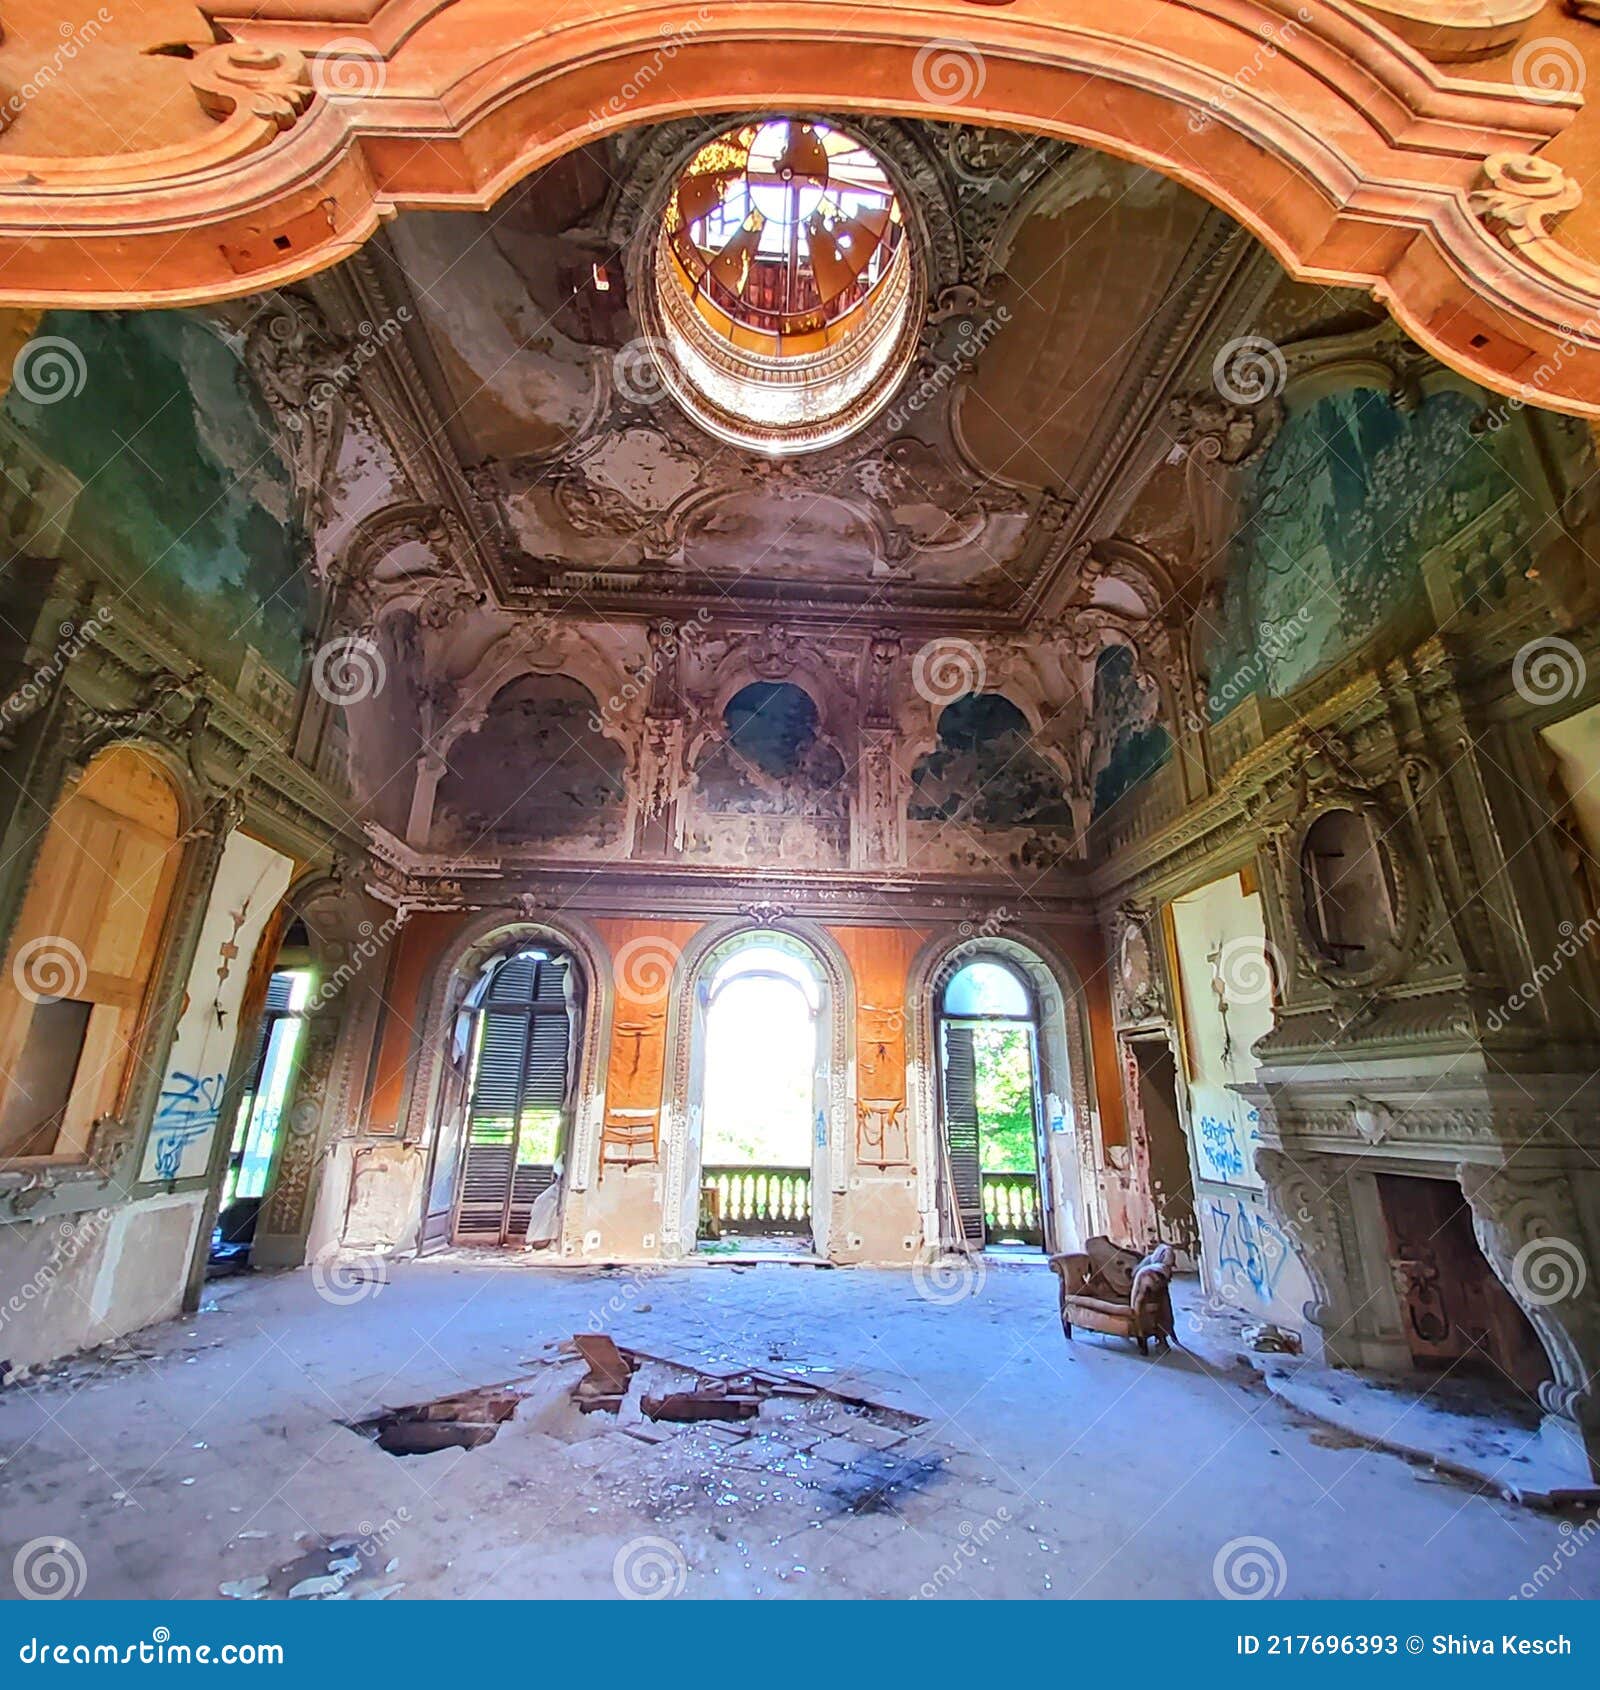 abandoned villa becker in turin city, italy. art, architecture and splendour